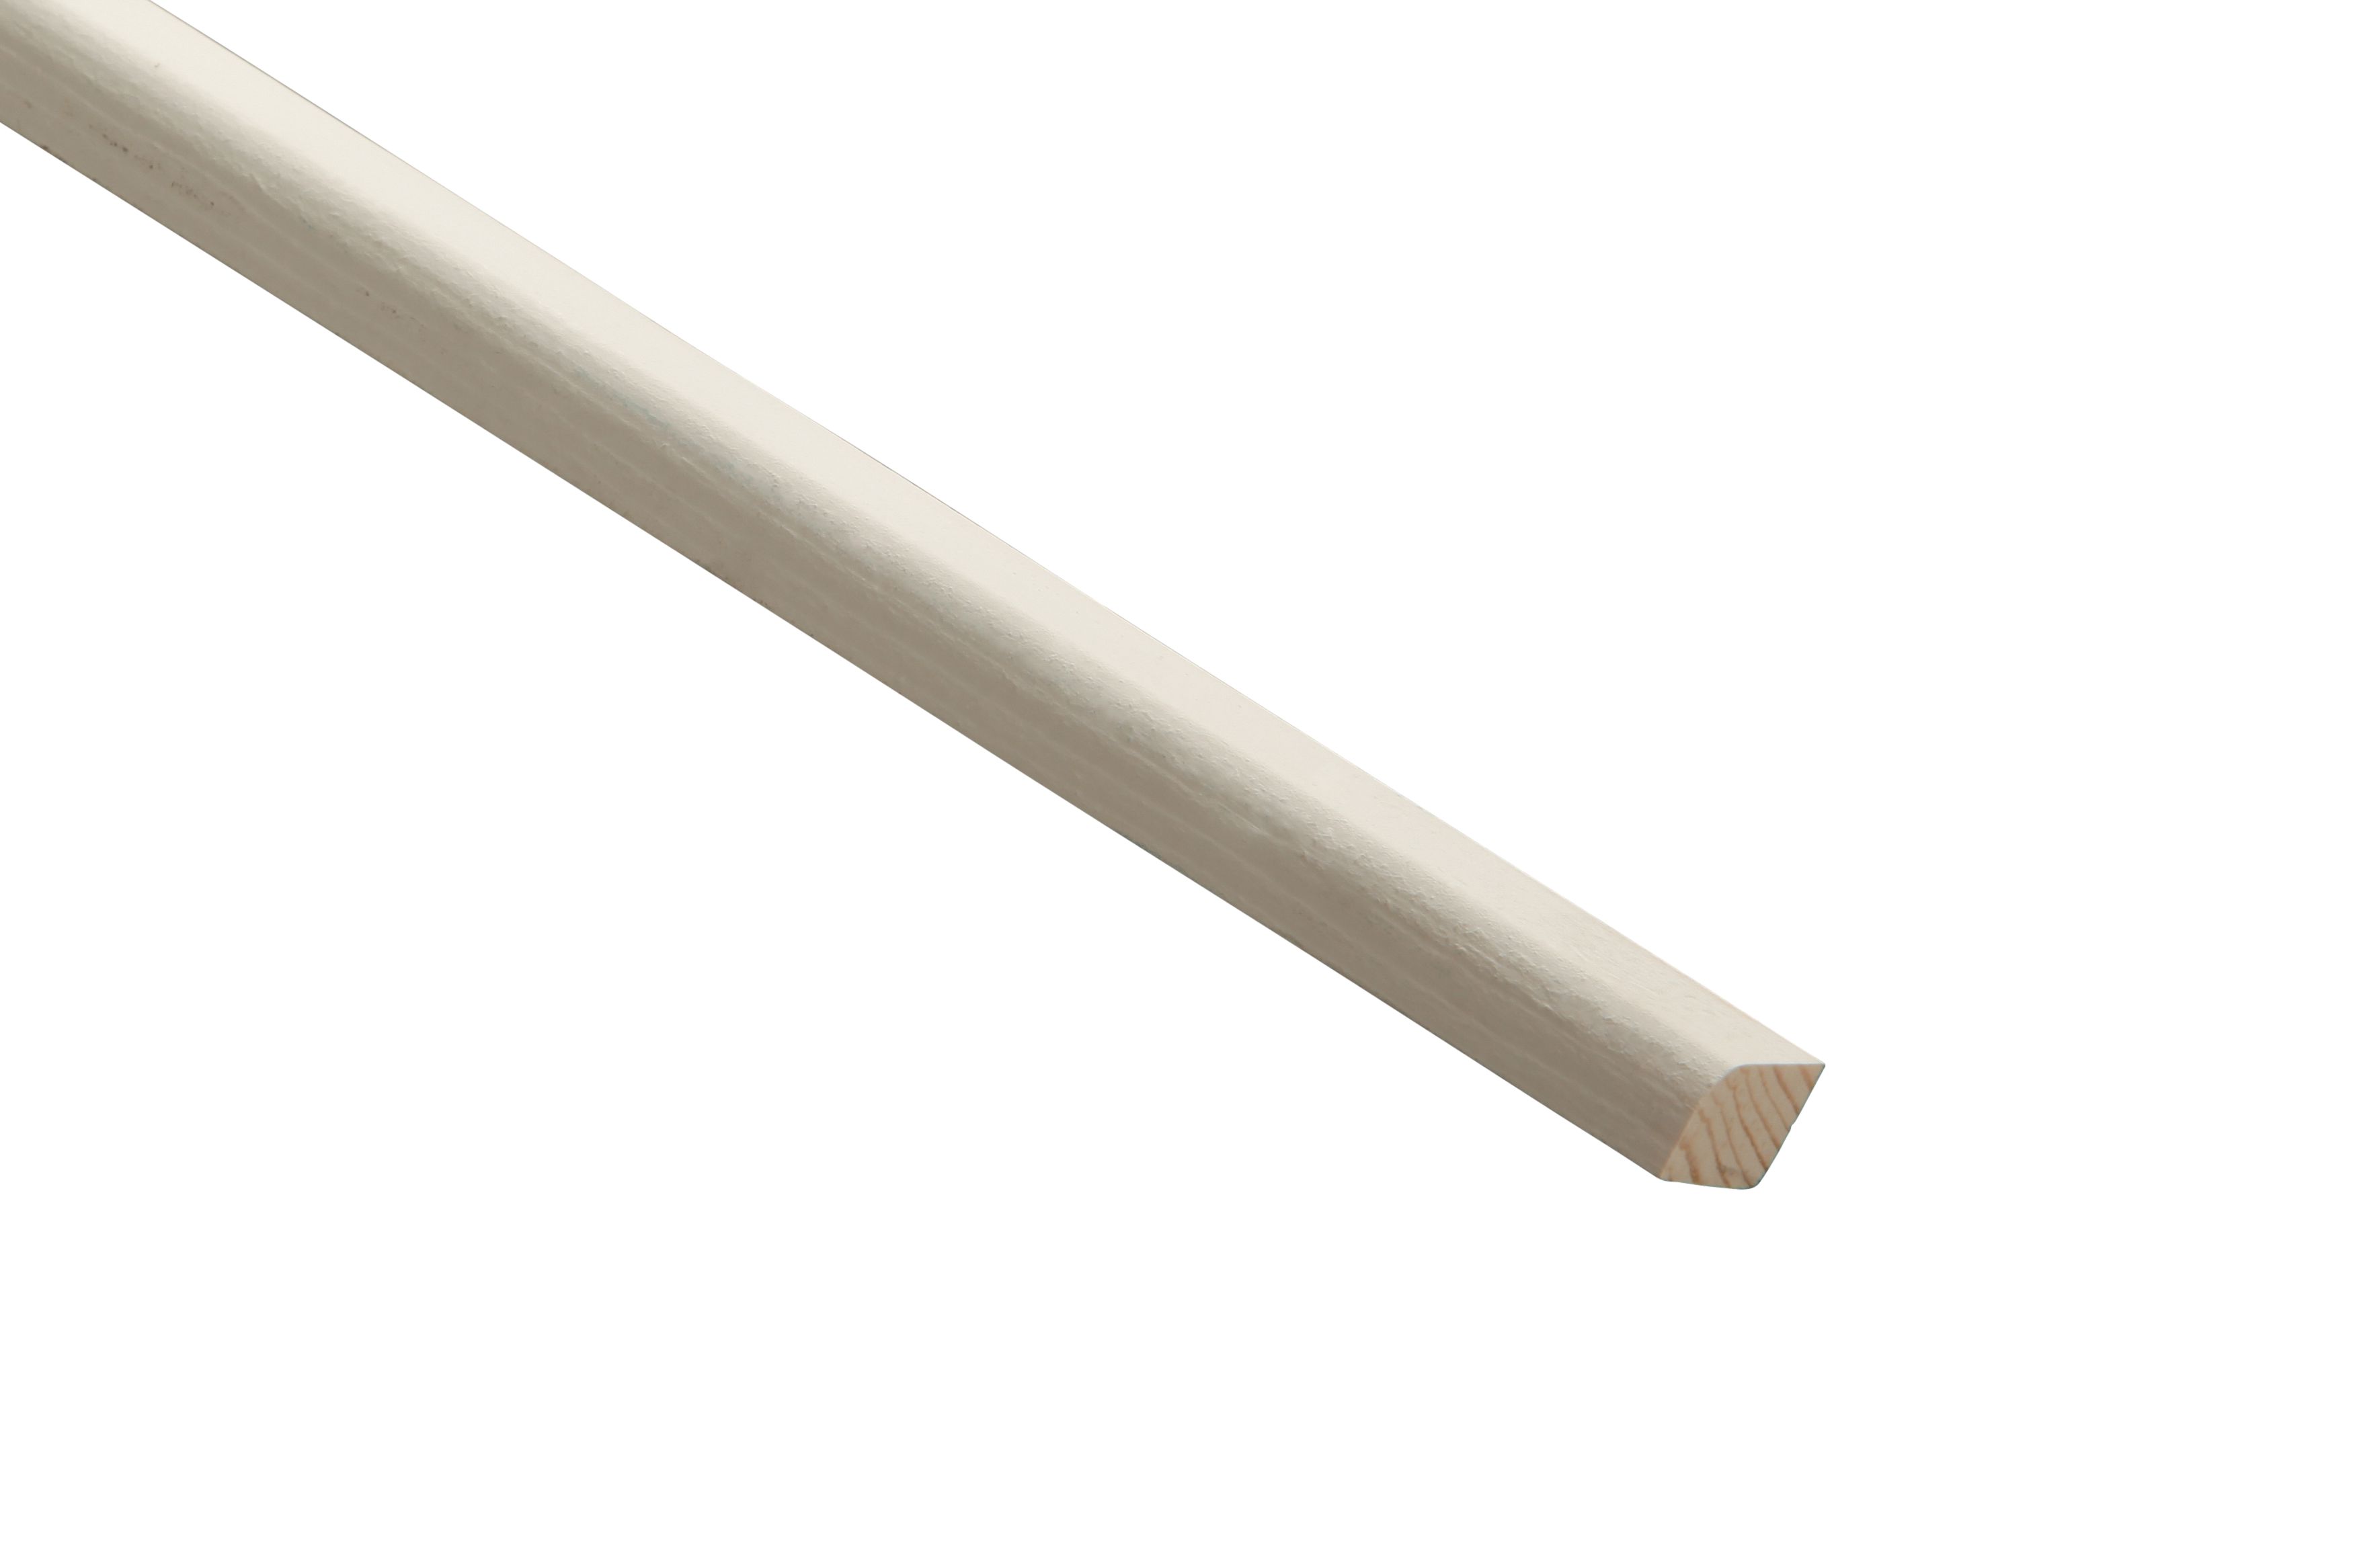 Image of Wickes Primed White Glass Bead Moulding - 10 x 15 x 2400mm